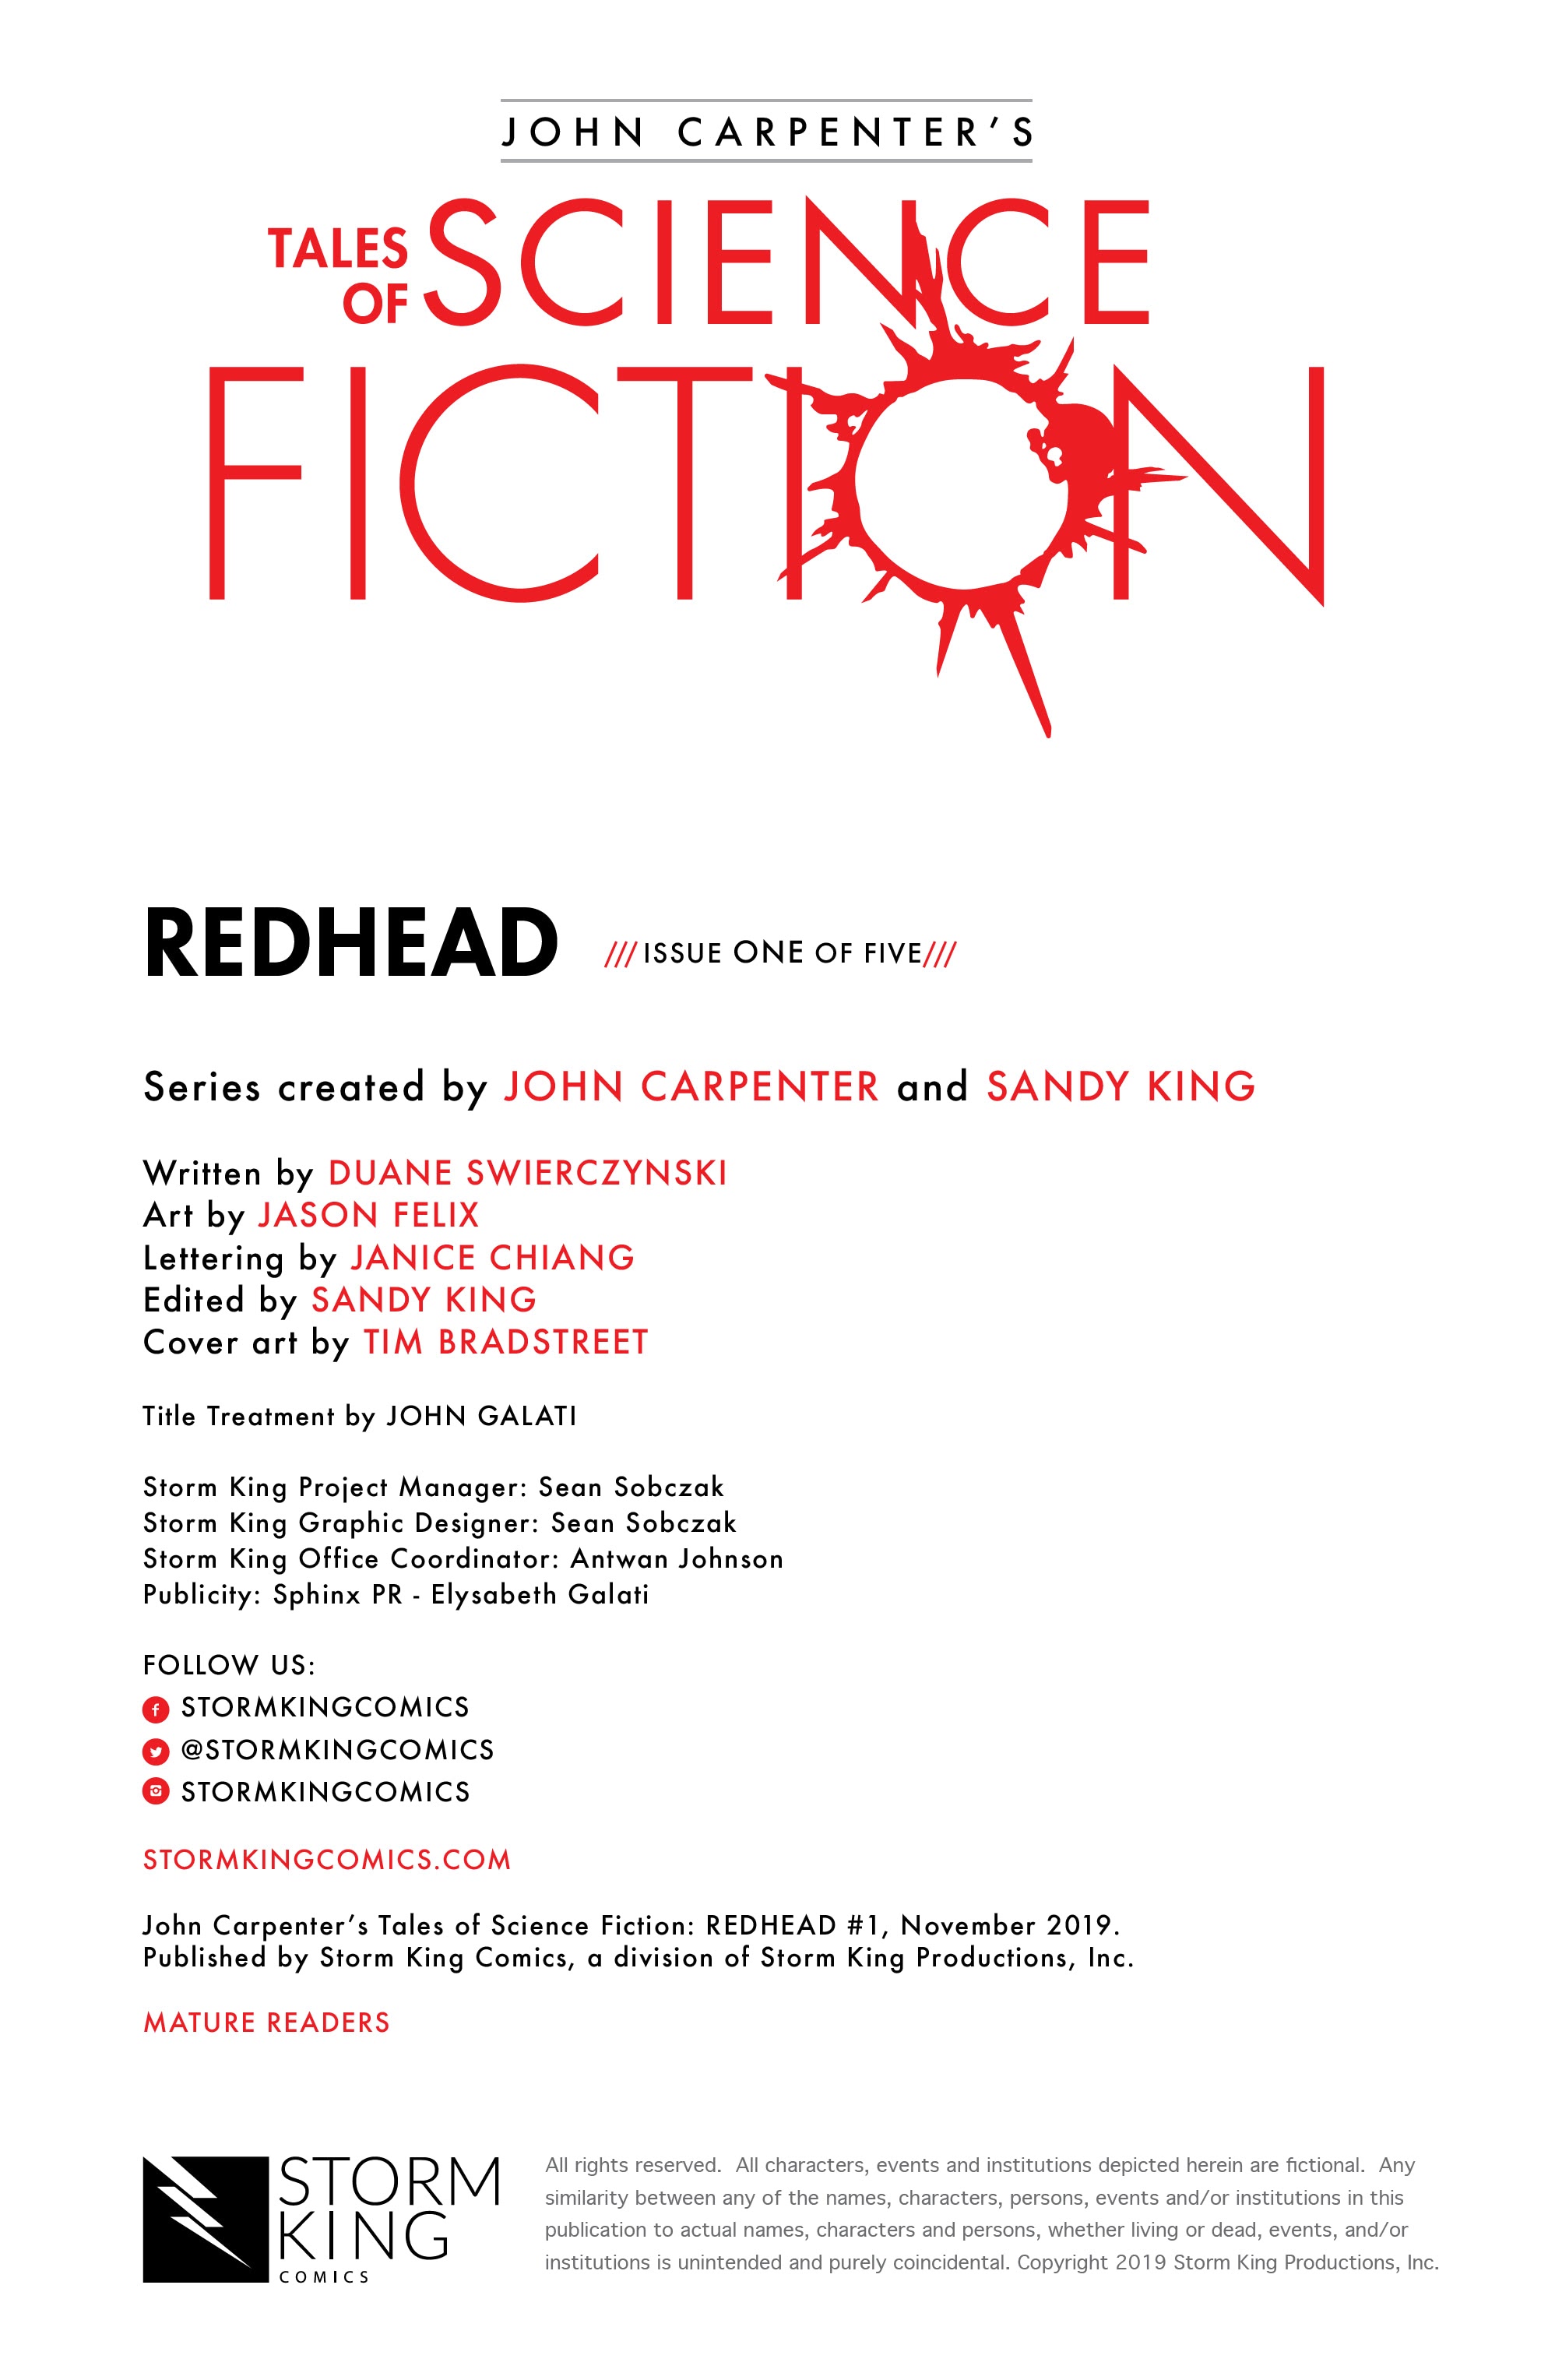 Read online John Carpenter's Tales of Science Fiction: Redhead comic -  Issue #1 - 2